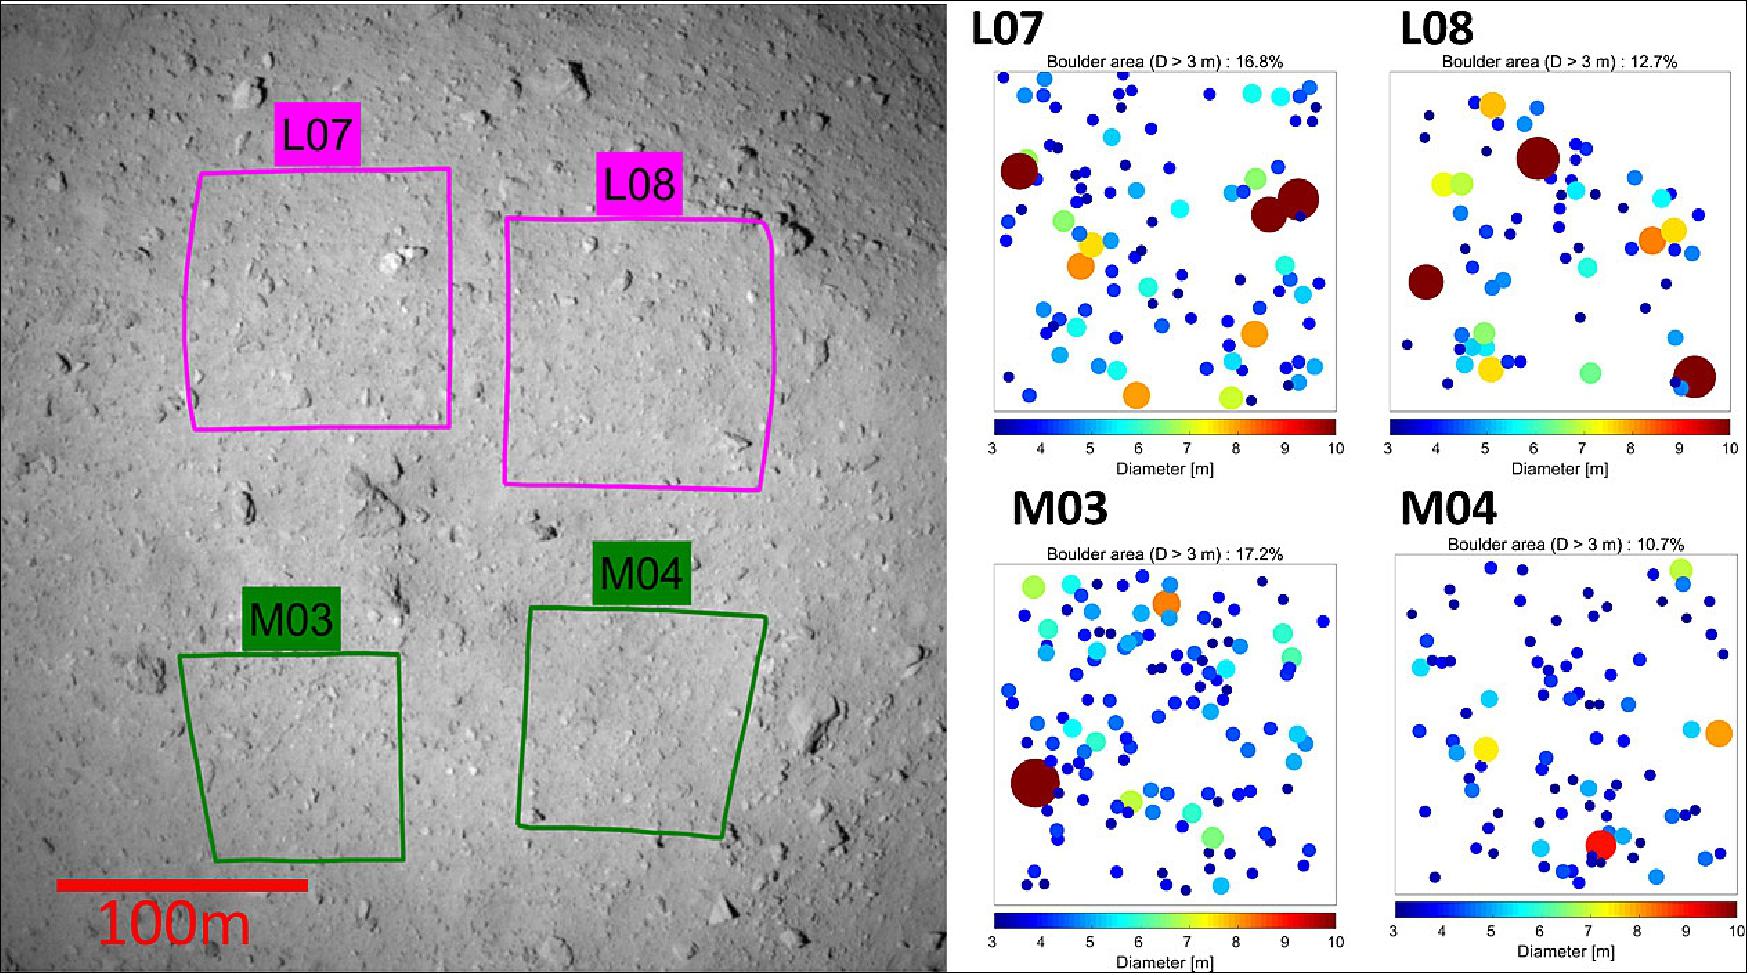 Figure 33: Left: An ONC-T image of the Hayabusa-2 landing candidates L08, L07 and M04, captured at the altitude of 5 km. Right: Corresponding boulder size distributions (image credit: Hayabusa-2 Team and the DLR/CNES MASCOT Team)